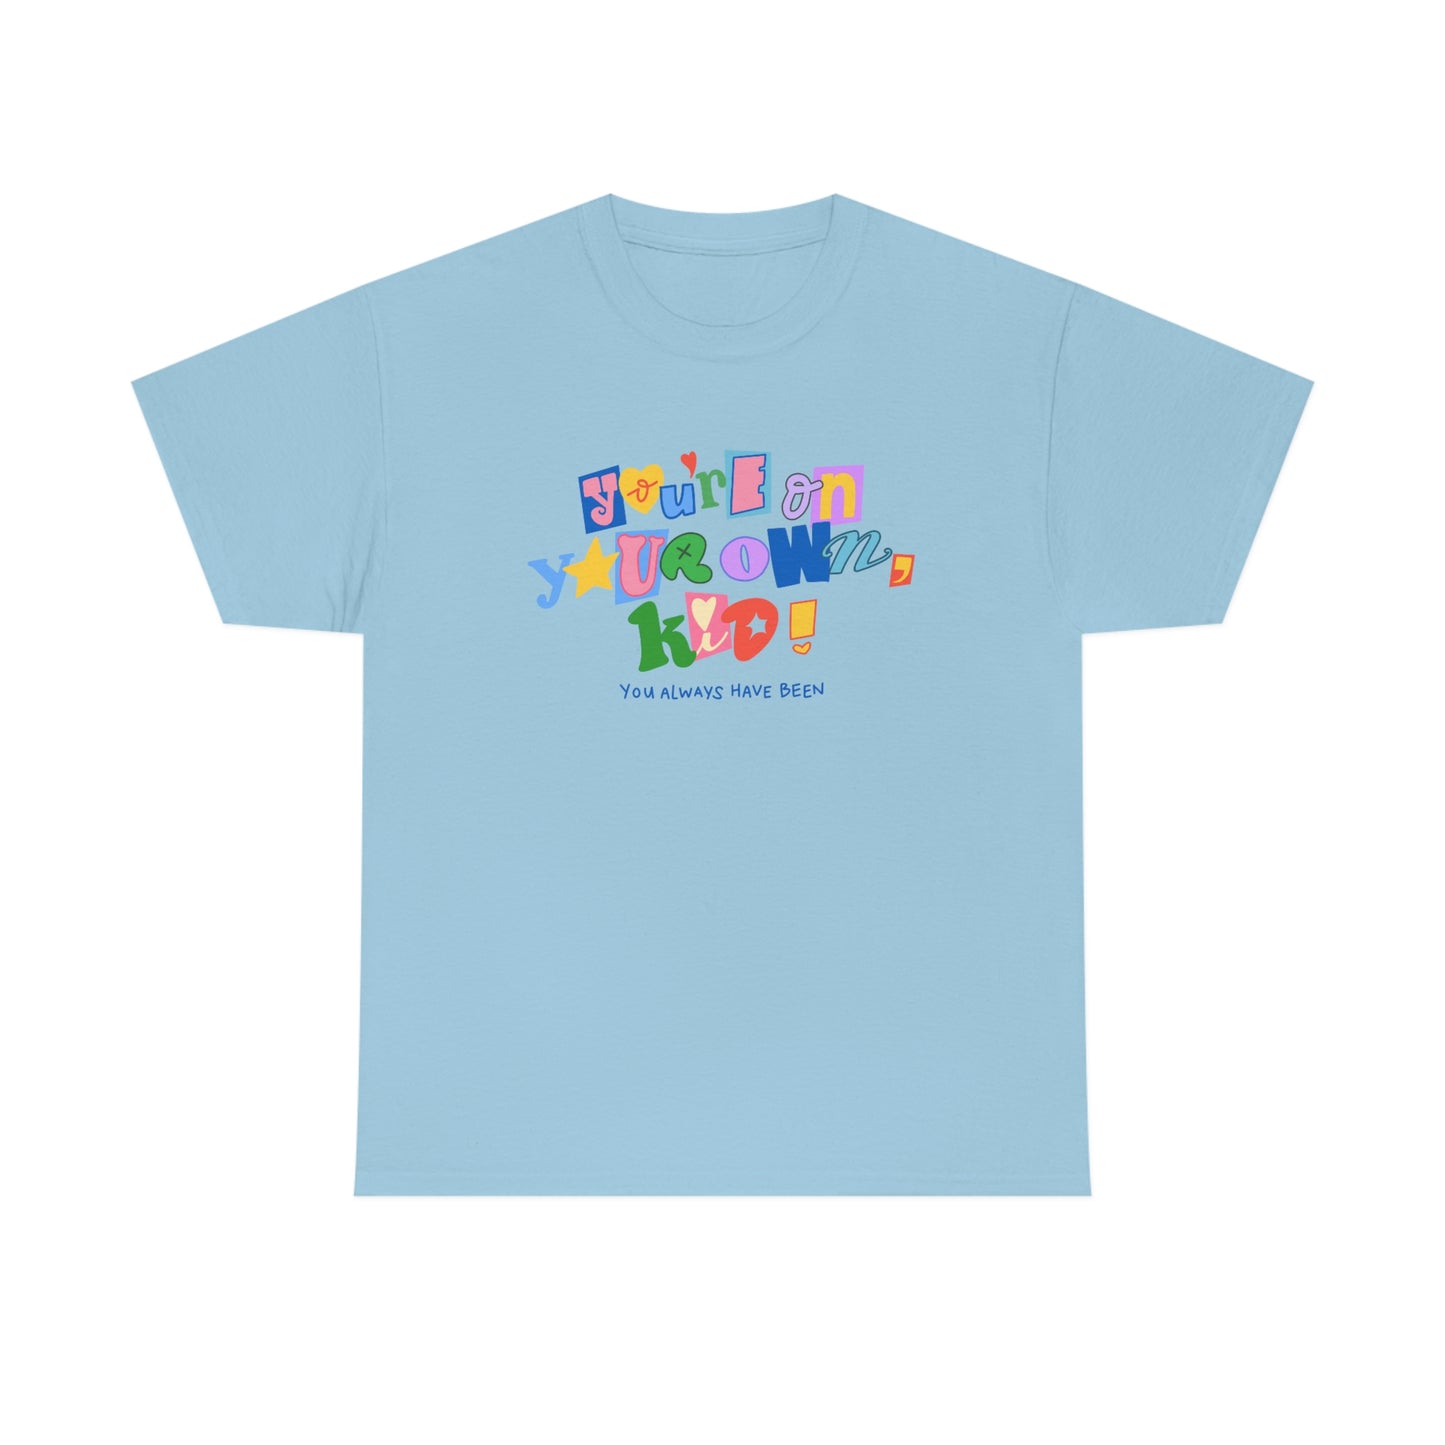 You're On Your Own Kid regular tee